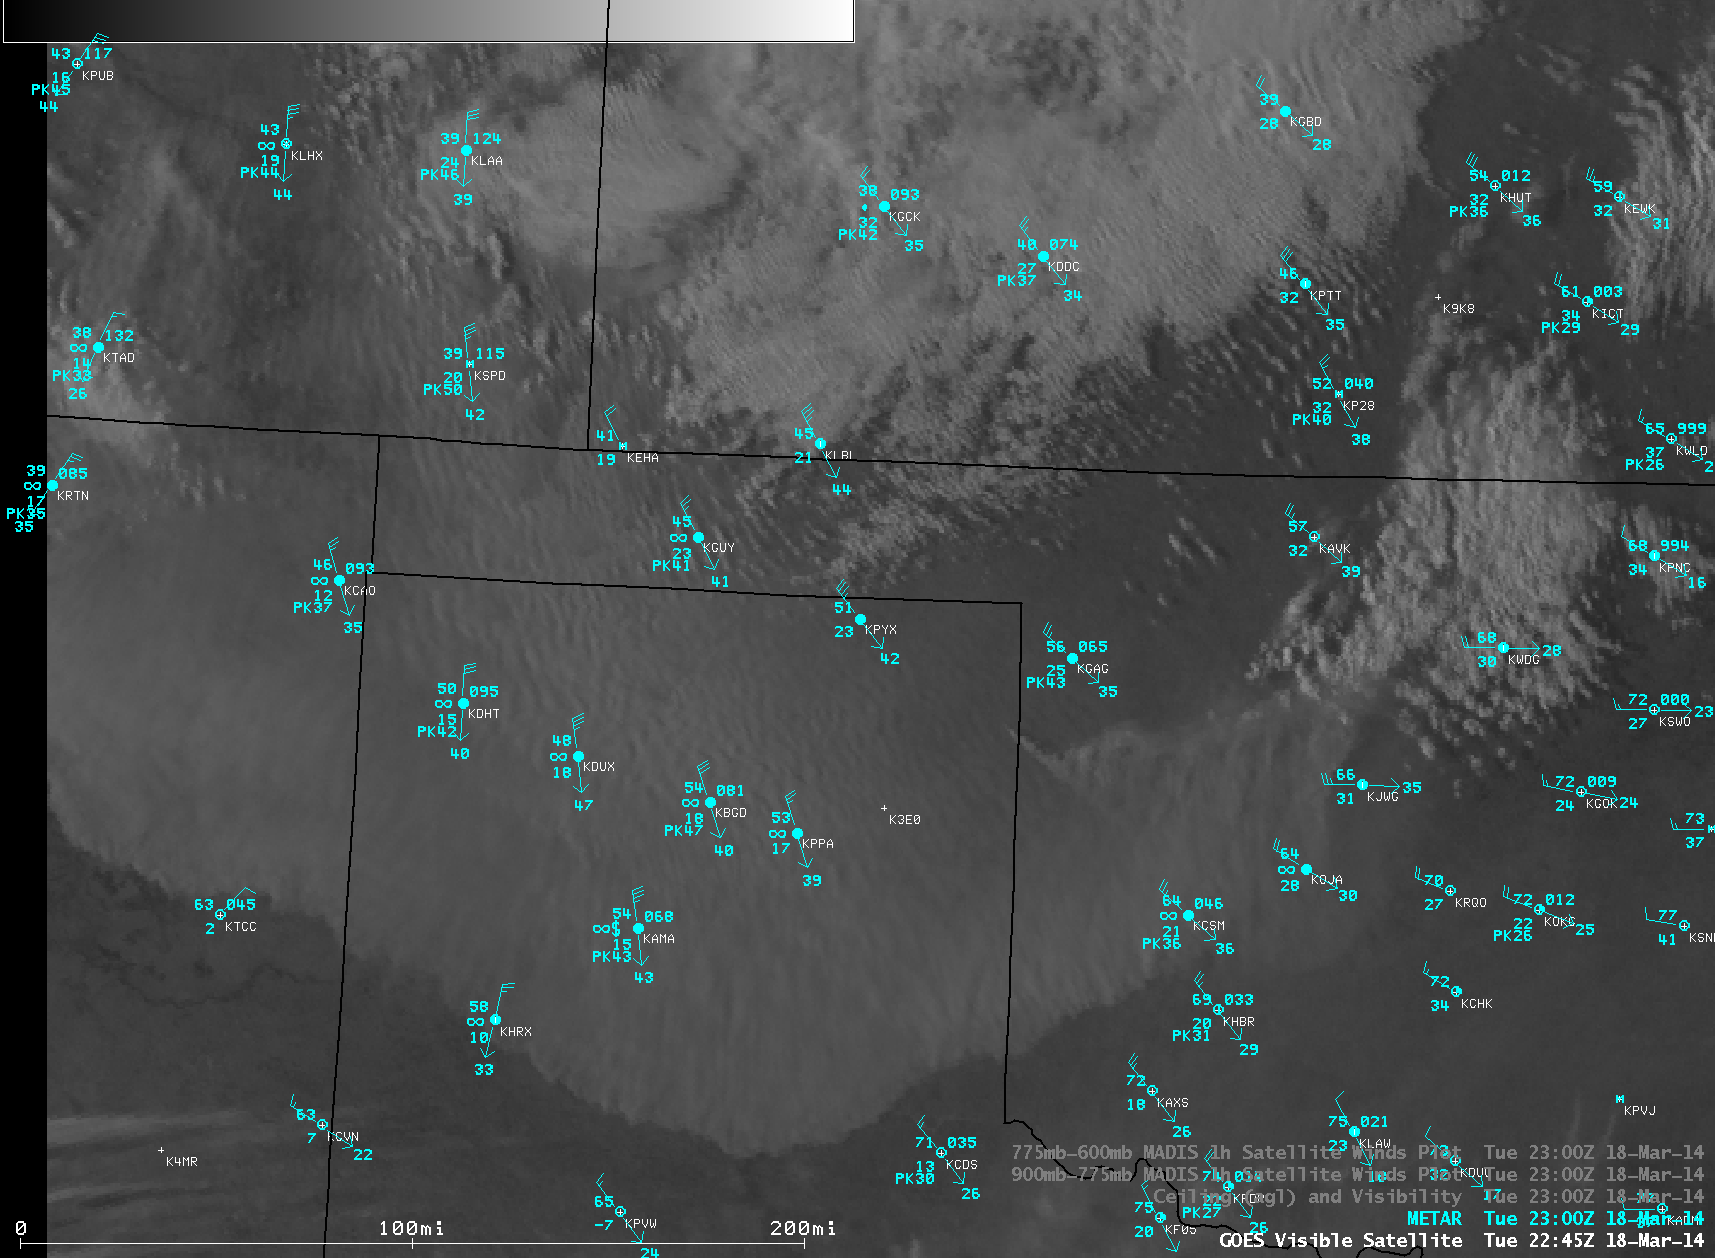 GOES-13 0.63 Âµm visible channel images with METAR surface reports (click to play animation)